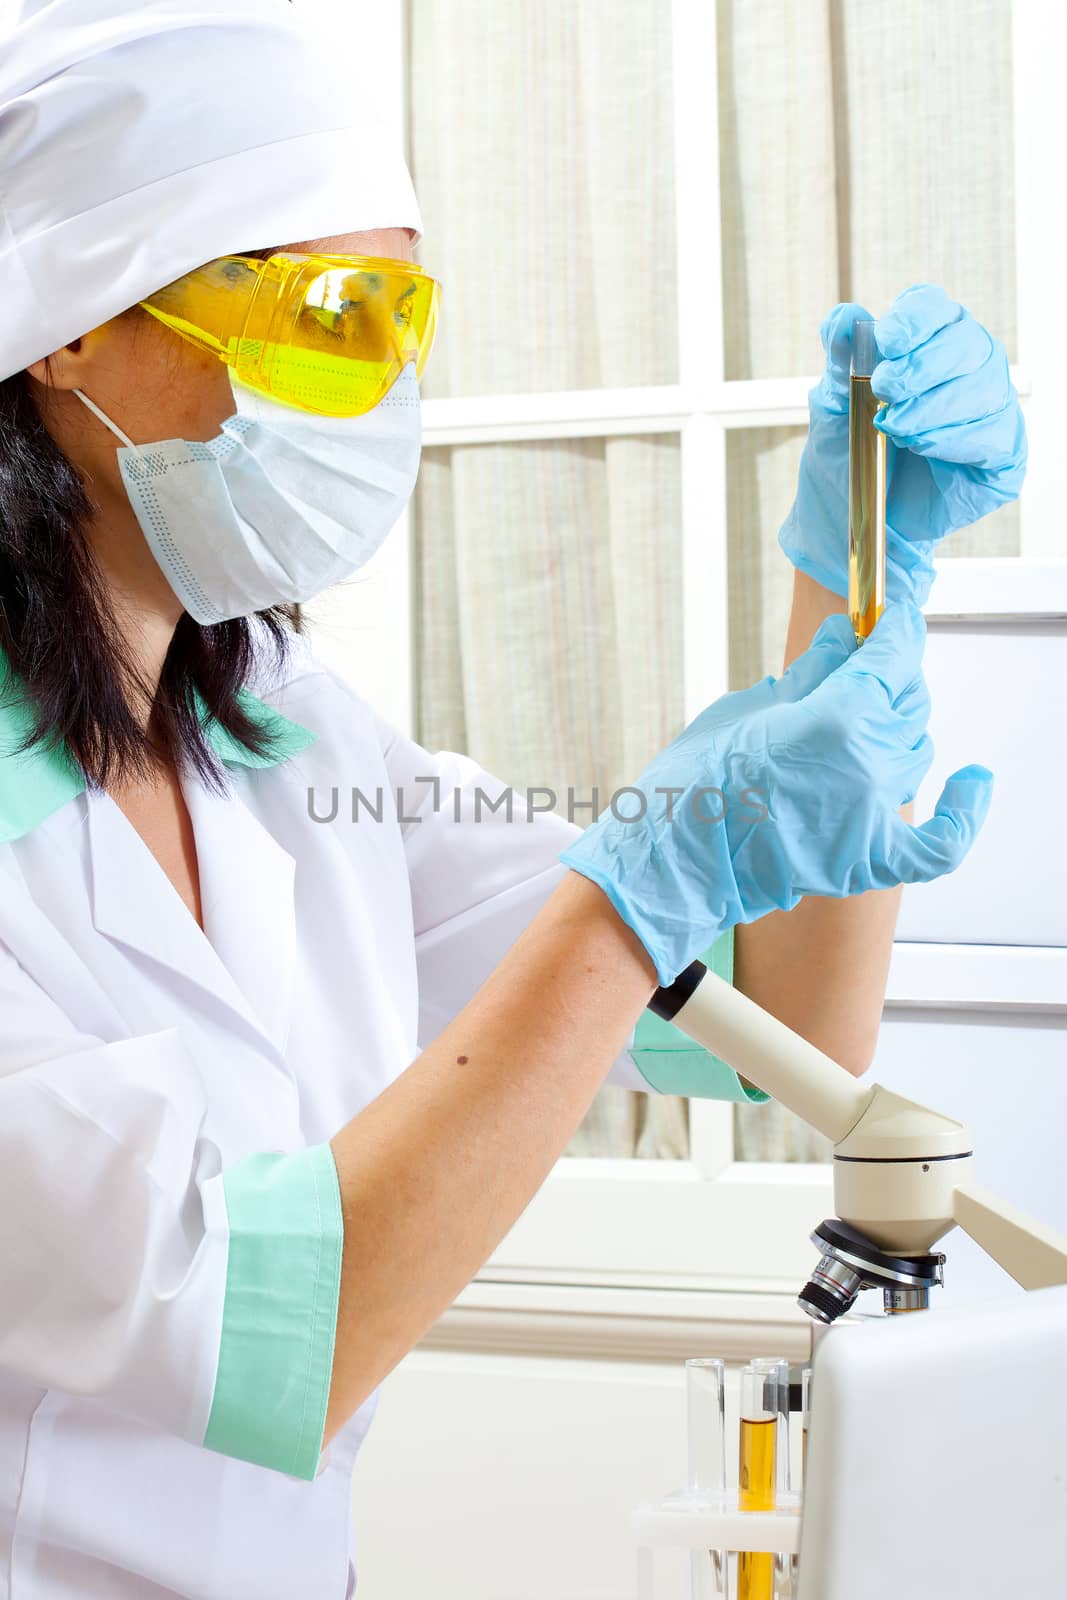 a female medical or scientific researcher or woman doctor looking at a test tube of yellow solution in a laboratory